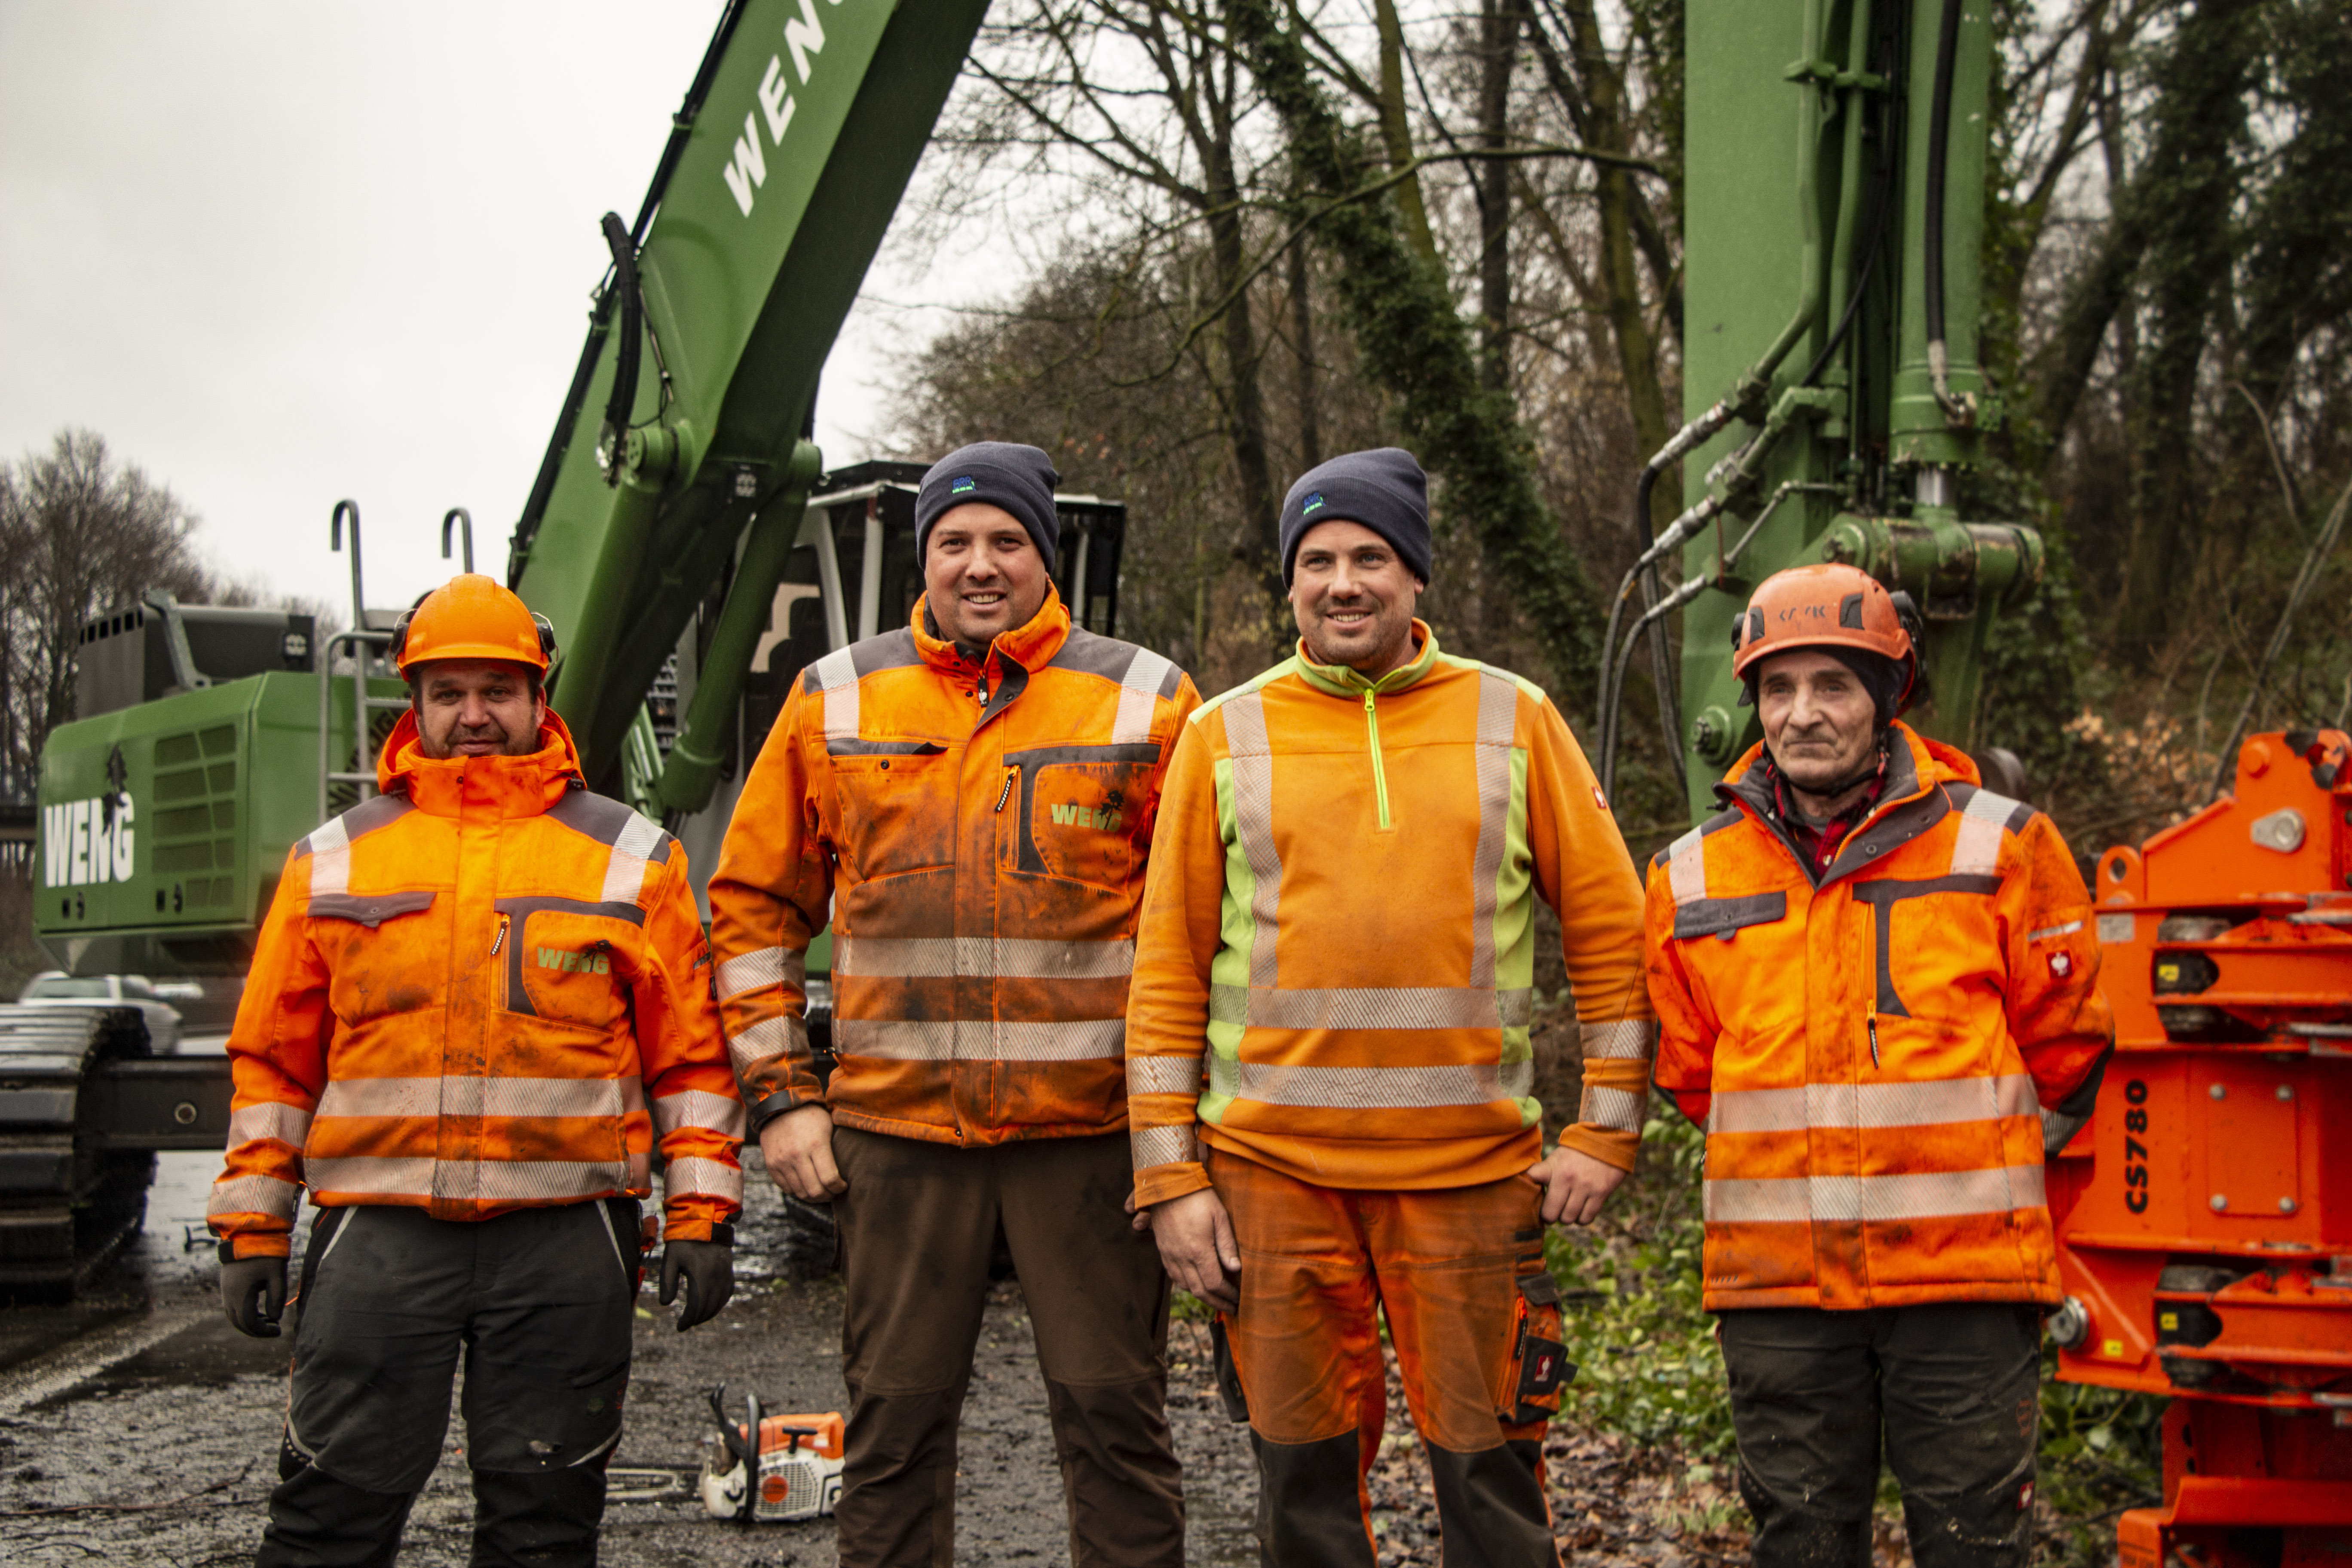 Marco and Torsten Weng (2nd and 3rd from left) have been active in tree felling for about 10 years. They are supported in this work by the employees Stanislav Sawada (right) and Grzegorz Jacek (left)